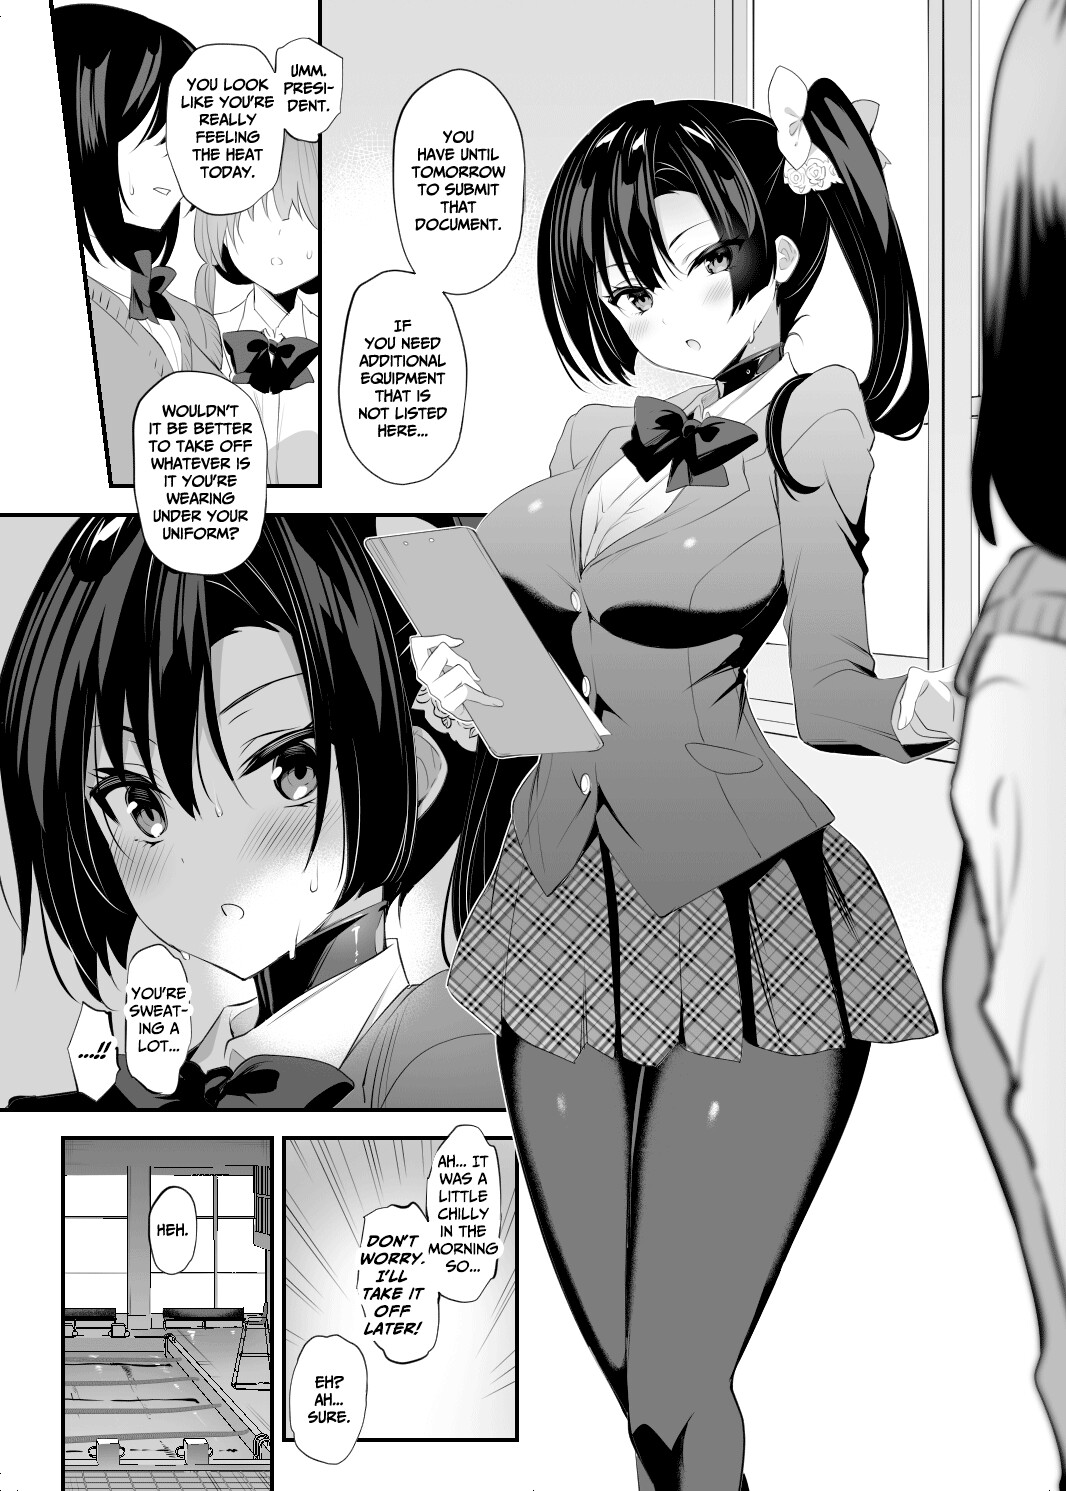 Hentai Manga Comic-School In The Spring of Youth 18.5-Read-2